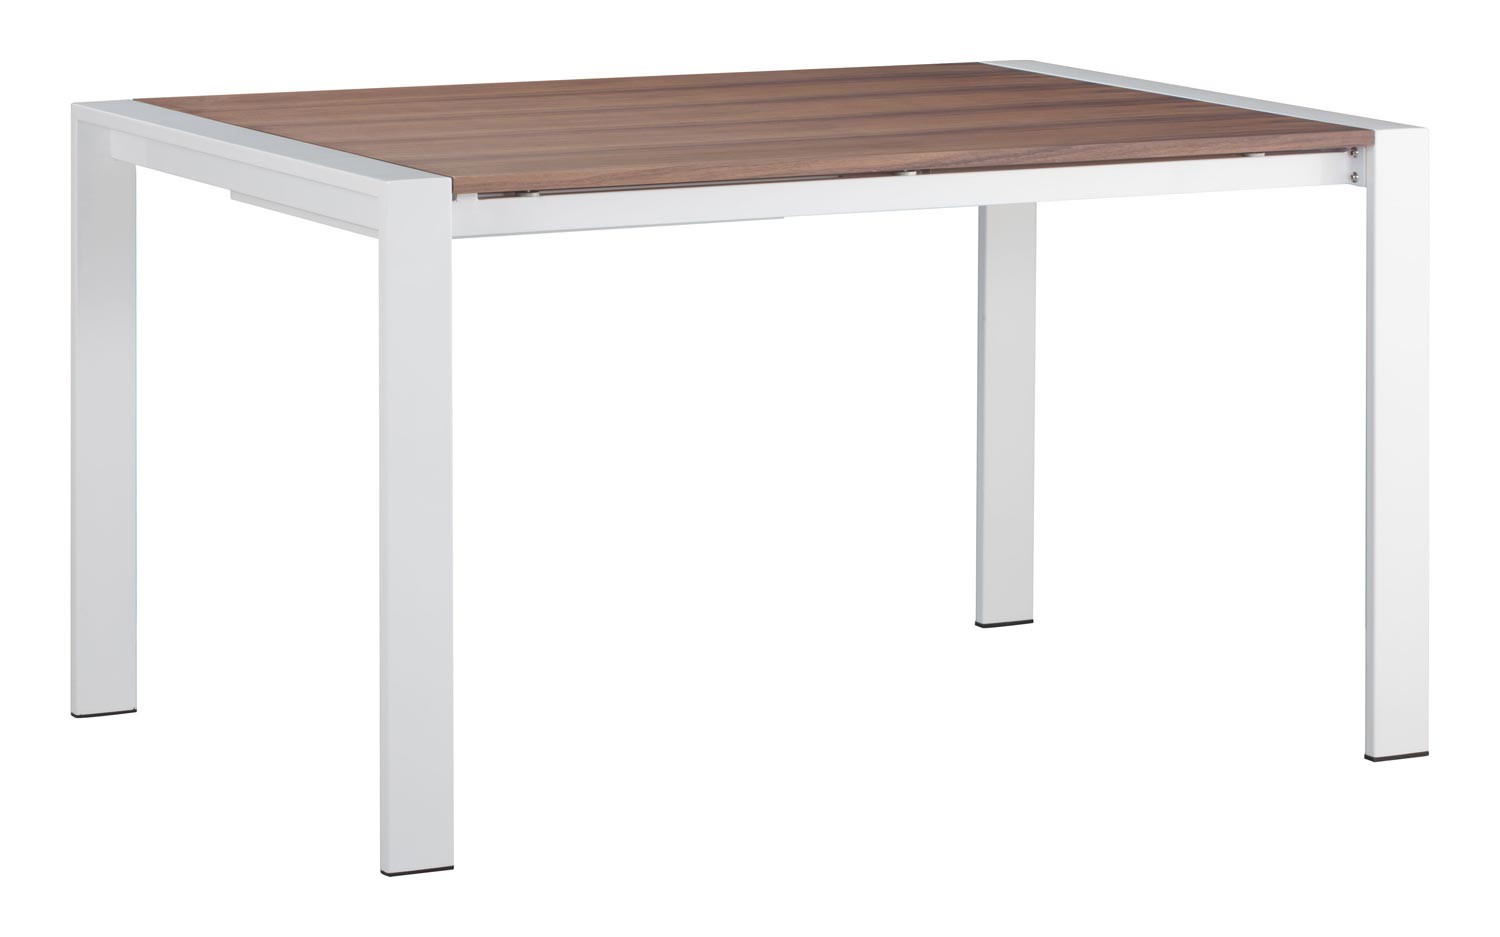 Zuo Modern Oslo Extension Dining Table - Walnut/White